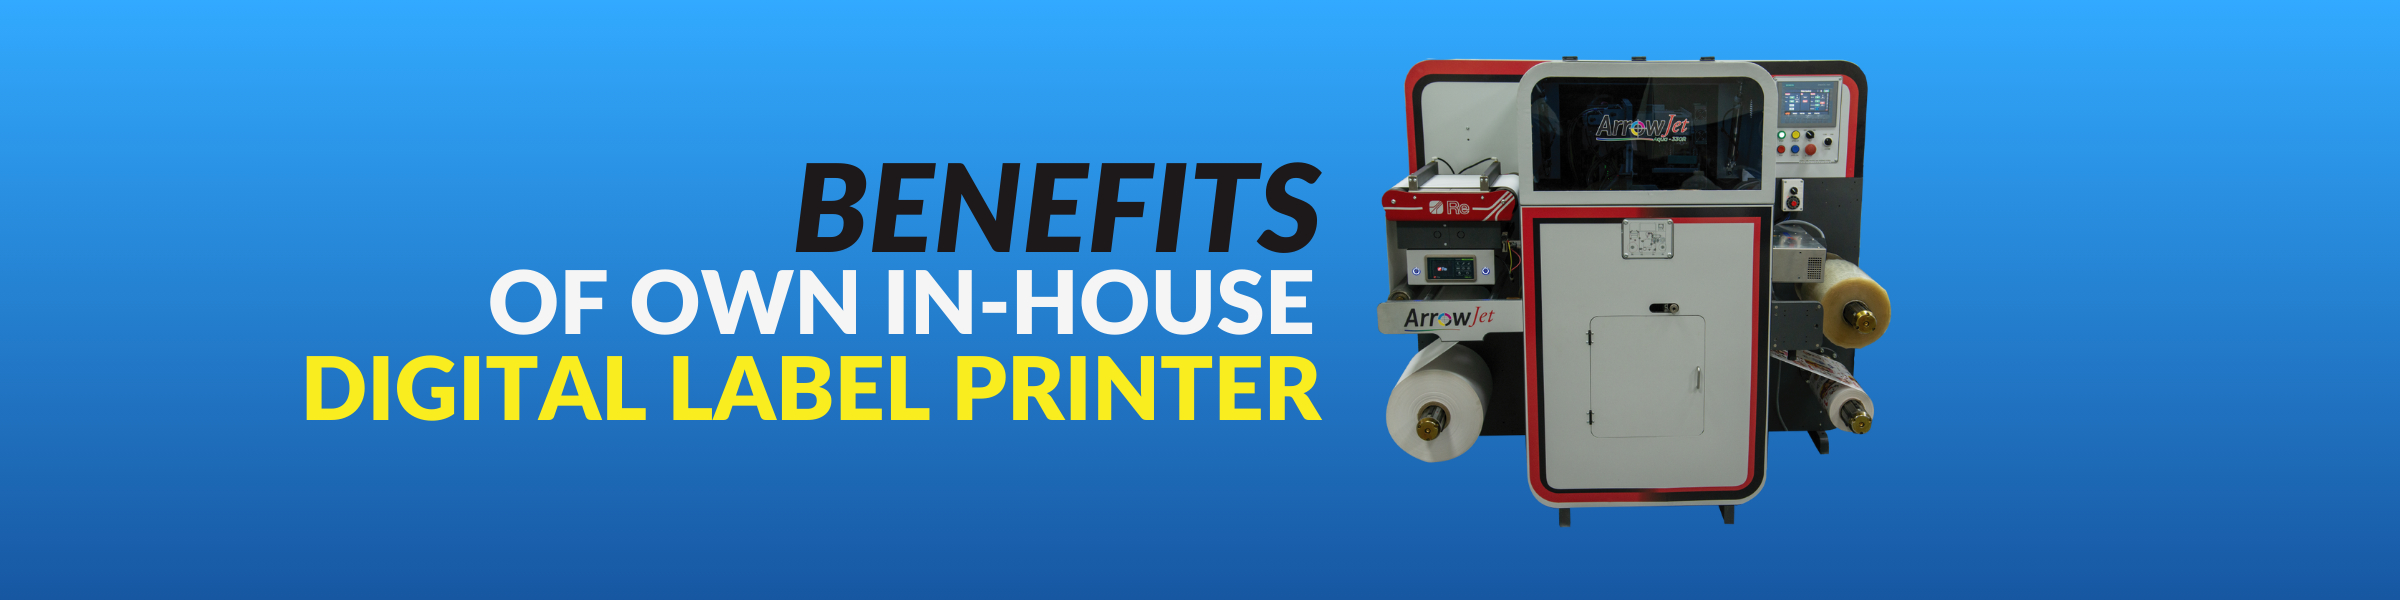 Benefits of own in-house digital label printer